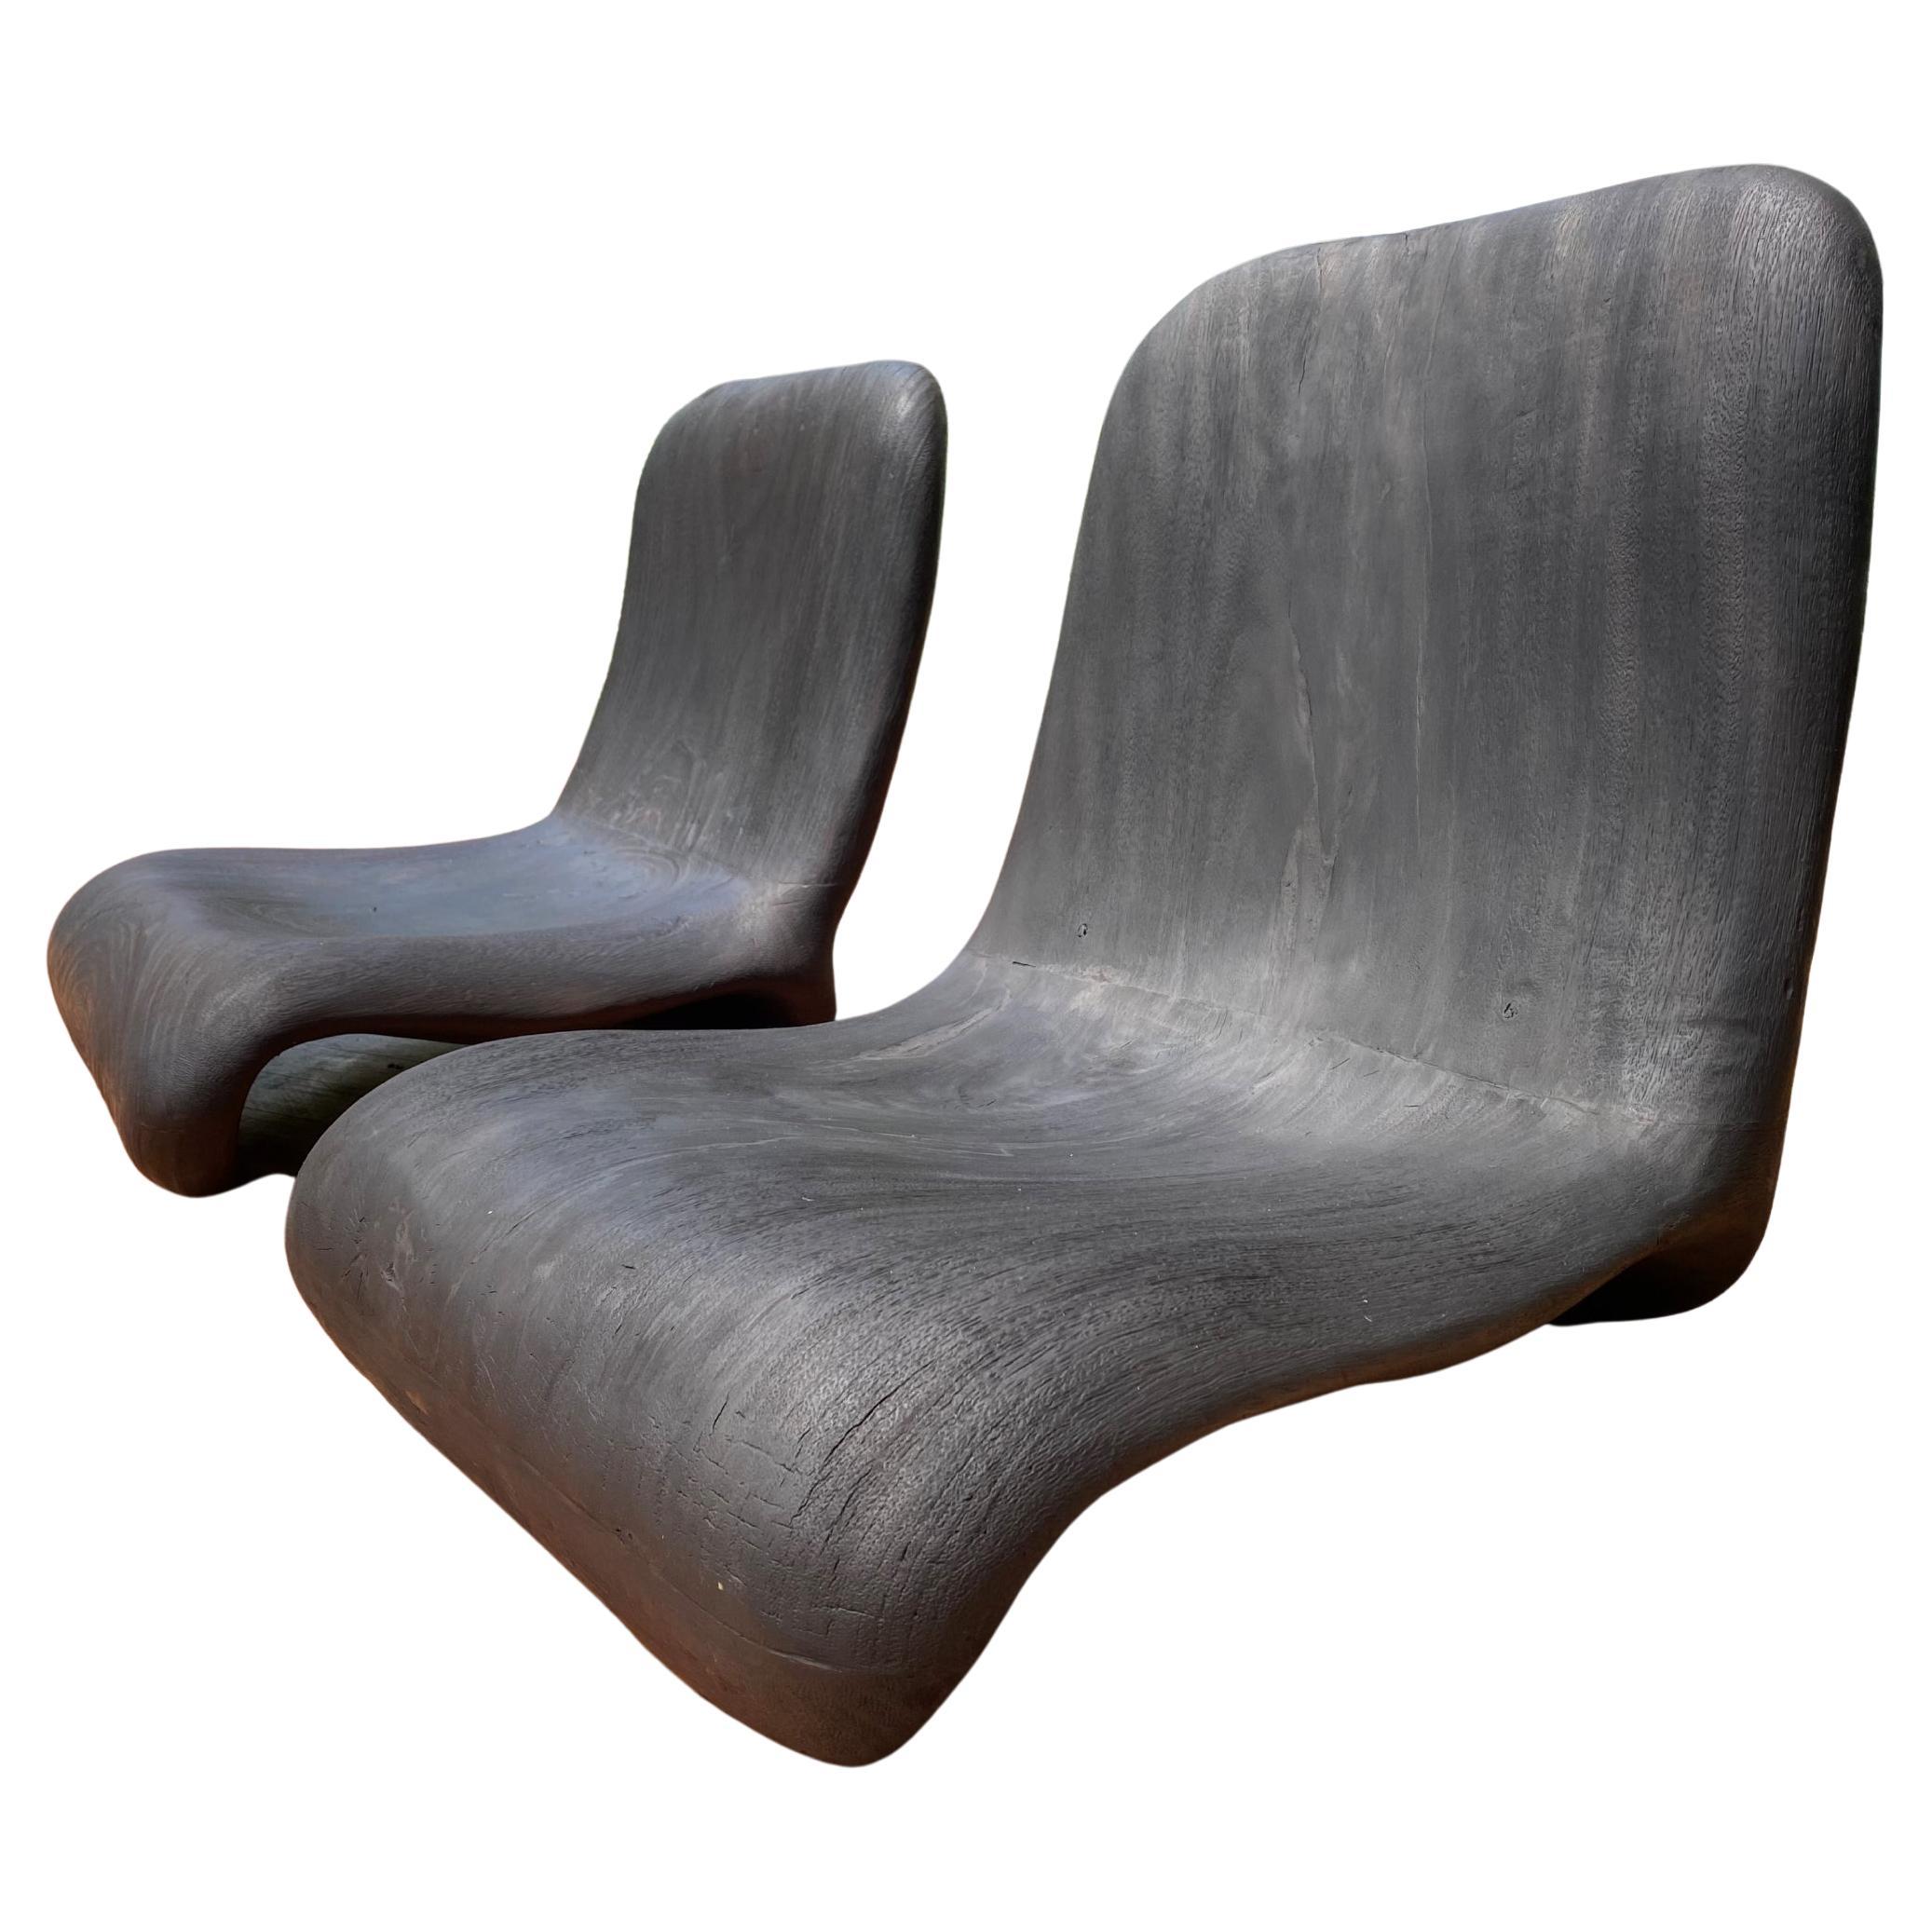 The Fold Wood Chair by CEU Studio, Represented by Tuleste Factory For Sale